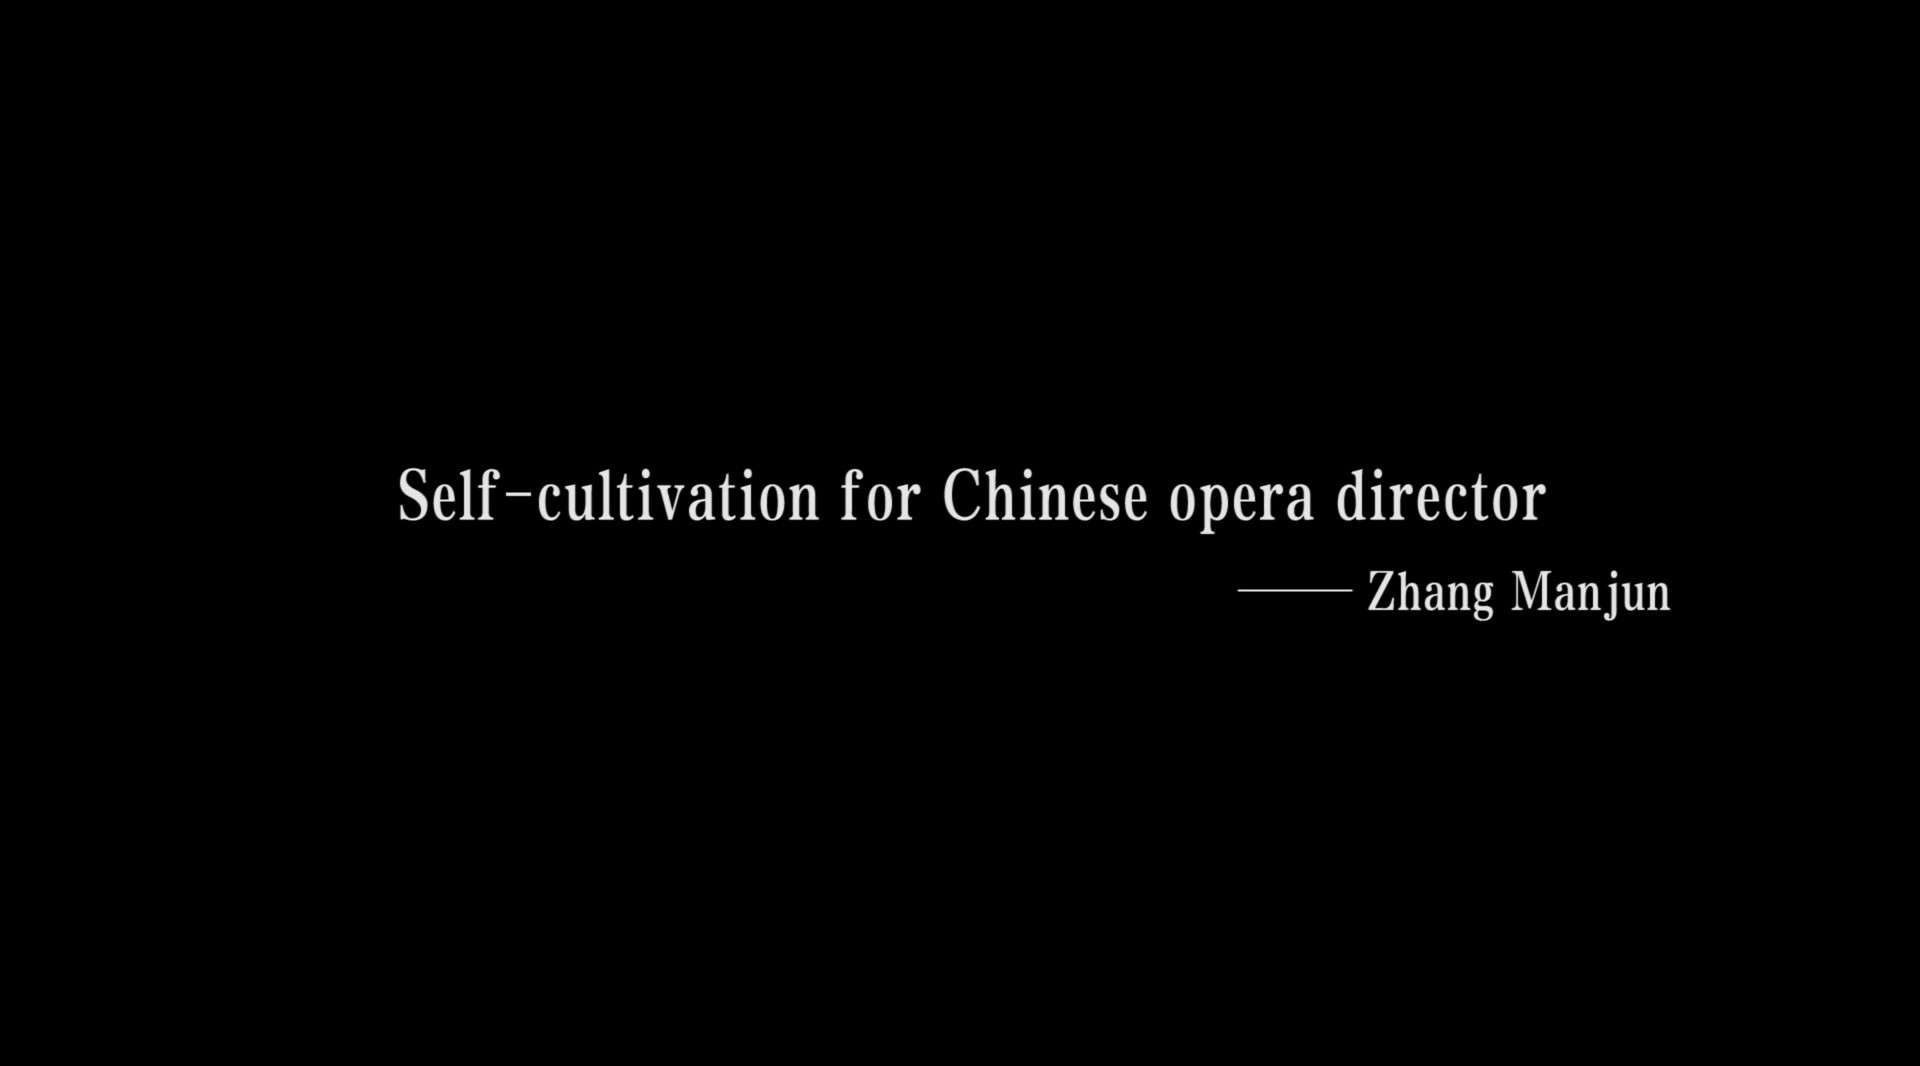 interview for a Chinese opera director